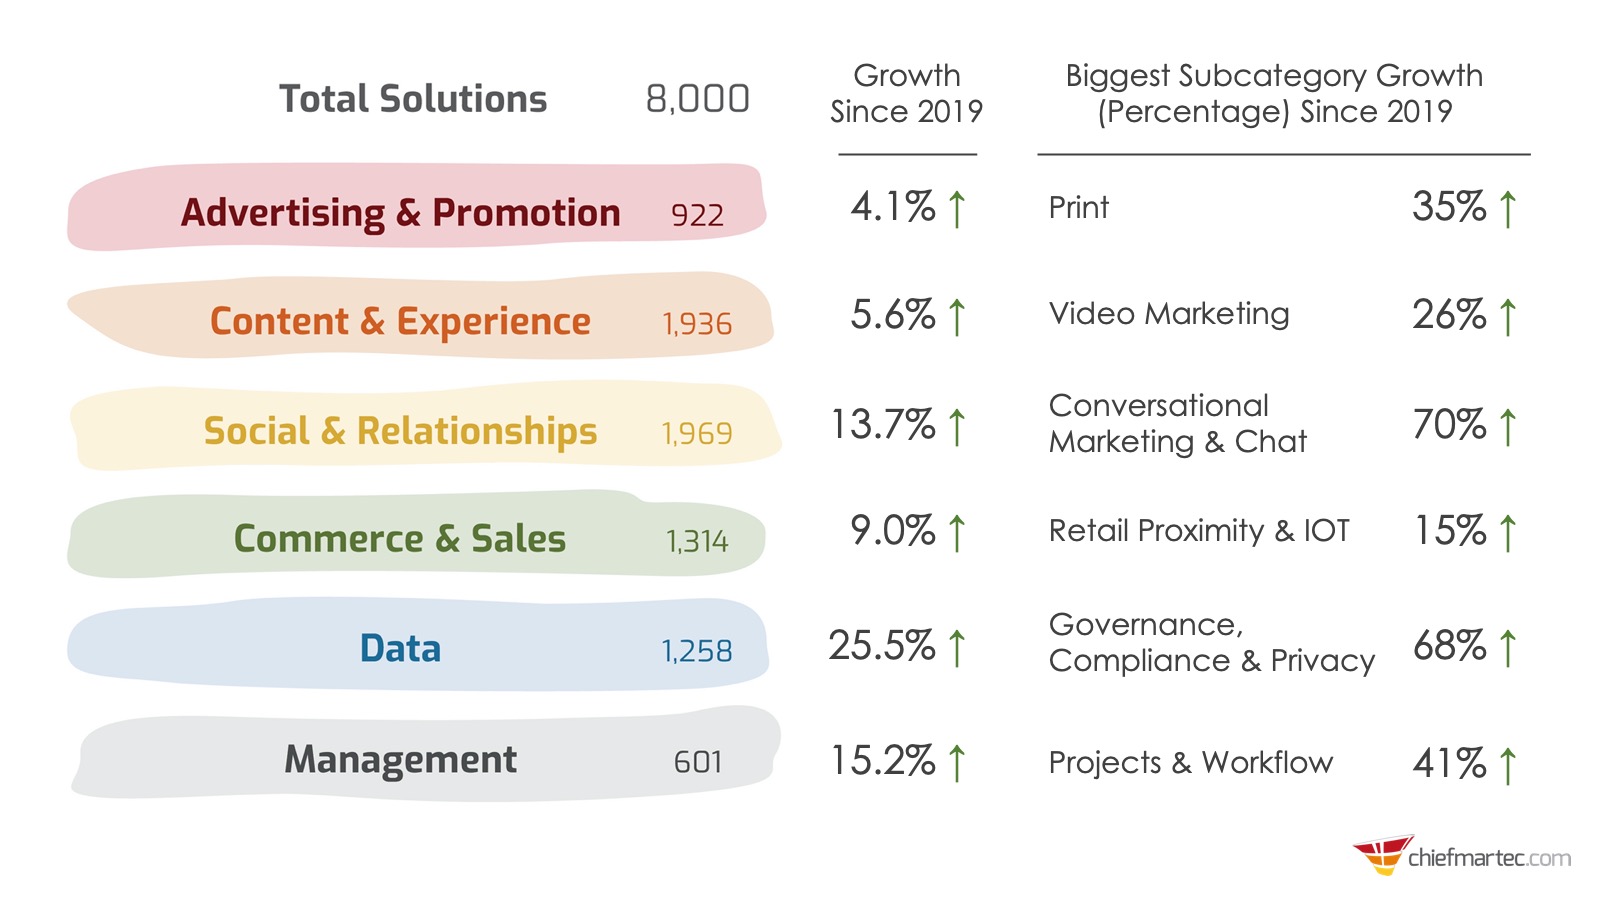 Martech Category Growth 2019-2020